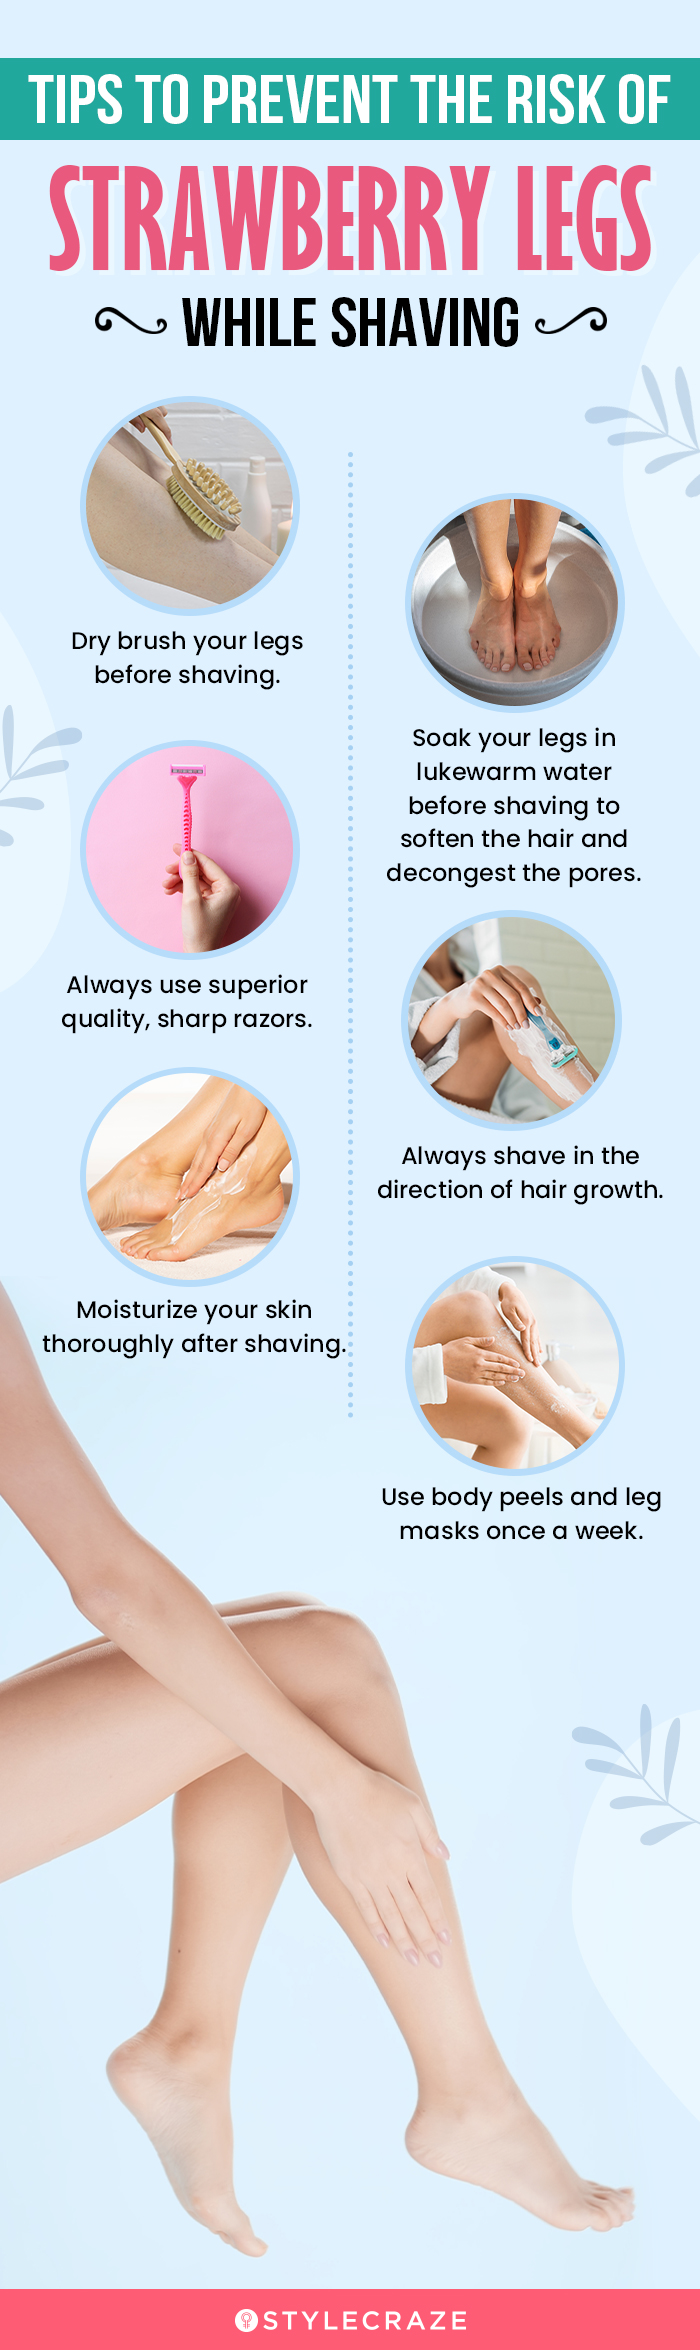 tips to prevent the risk of strawberry legs while shaving [infographic]